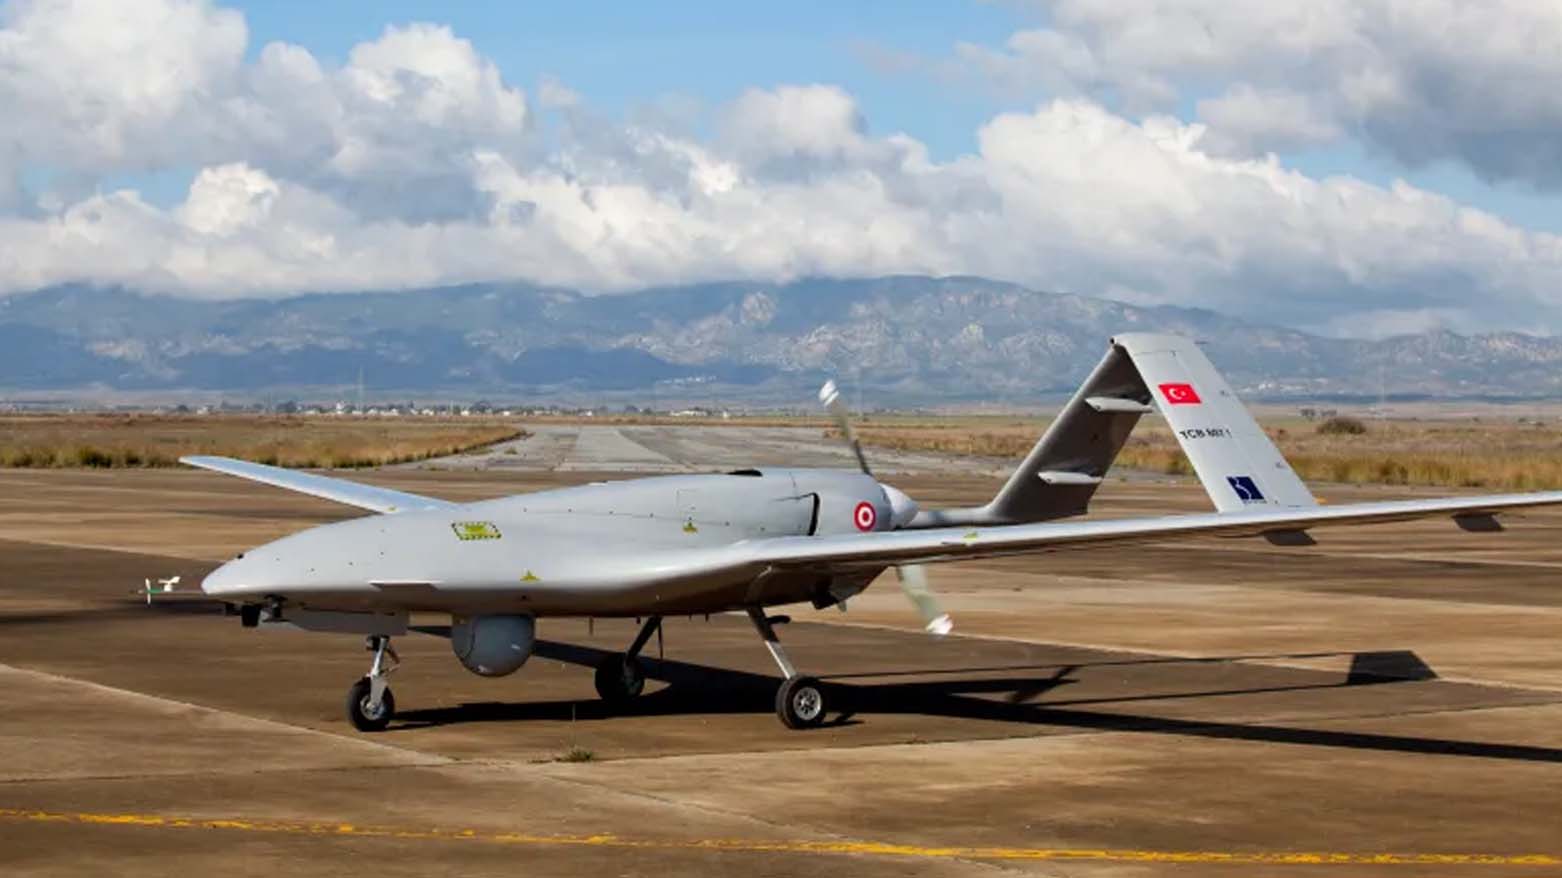 The Turkish-made Bayraktar TB2 drone is pictured at Gecitkale military airbase near Famagusta in Northern Cyprus, Dec. 16, 2019. (Photo: Birol Bebek/AFP)